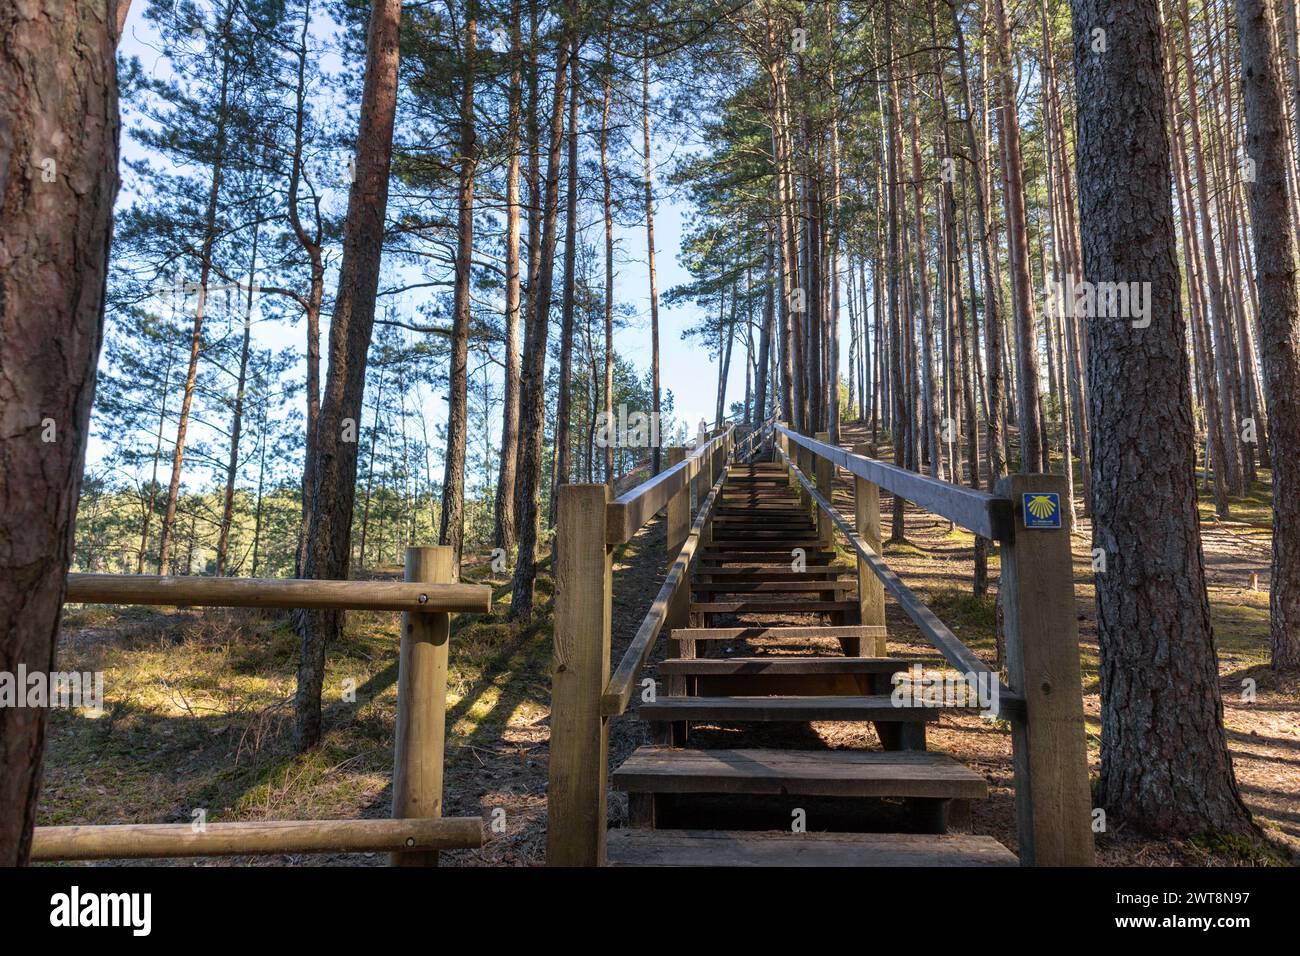 Wooden plank steps on a forest walking path Stock Photo